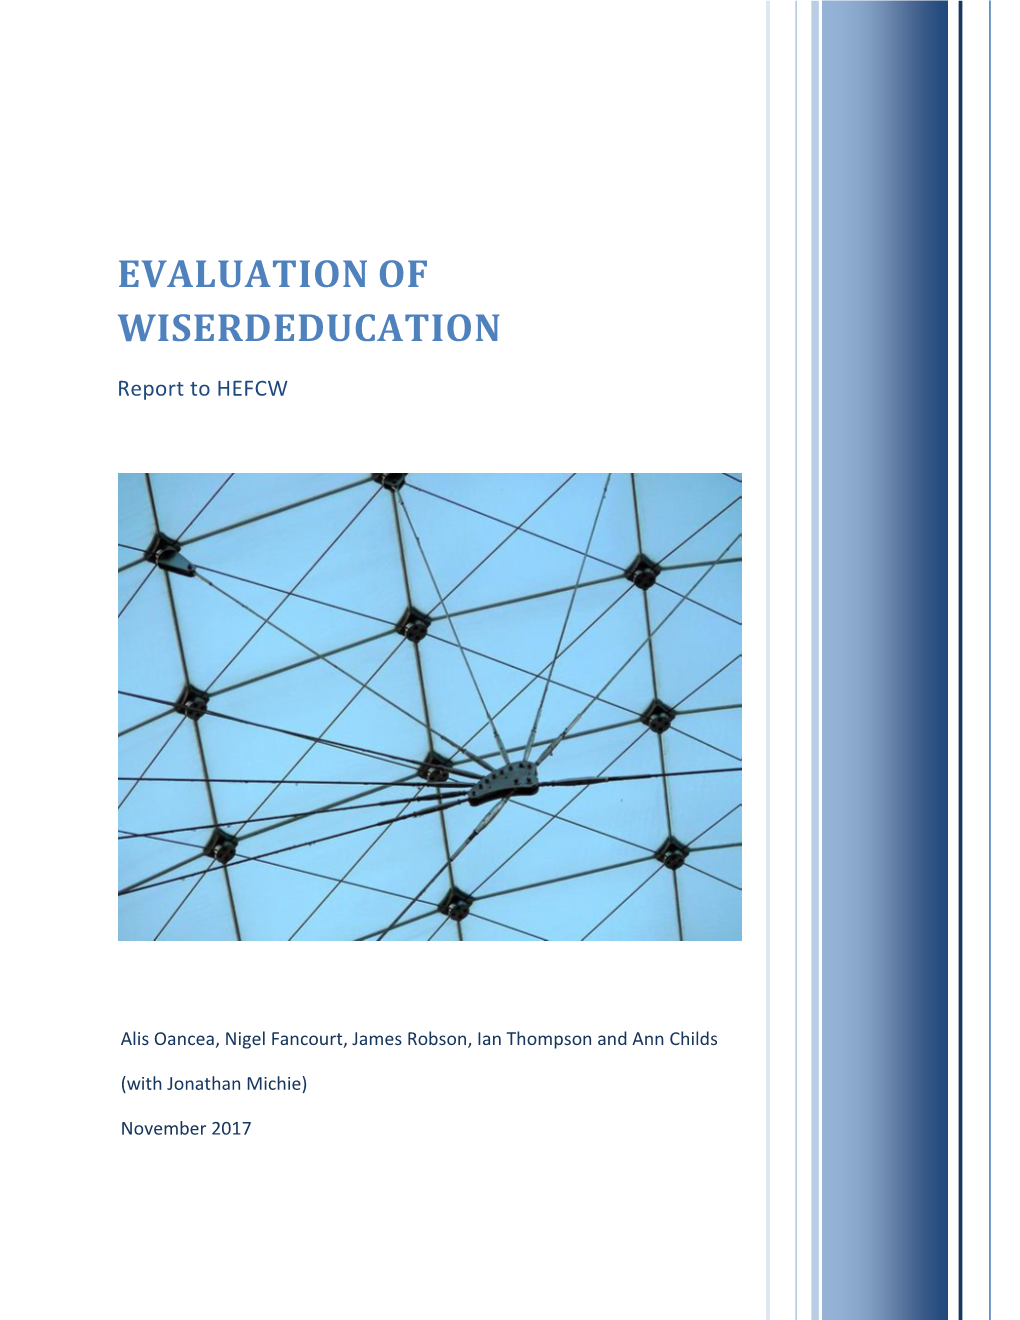 Evaluation of Wiserdeducation